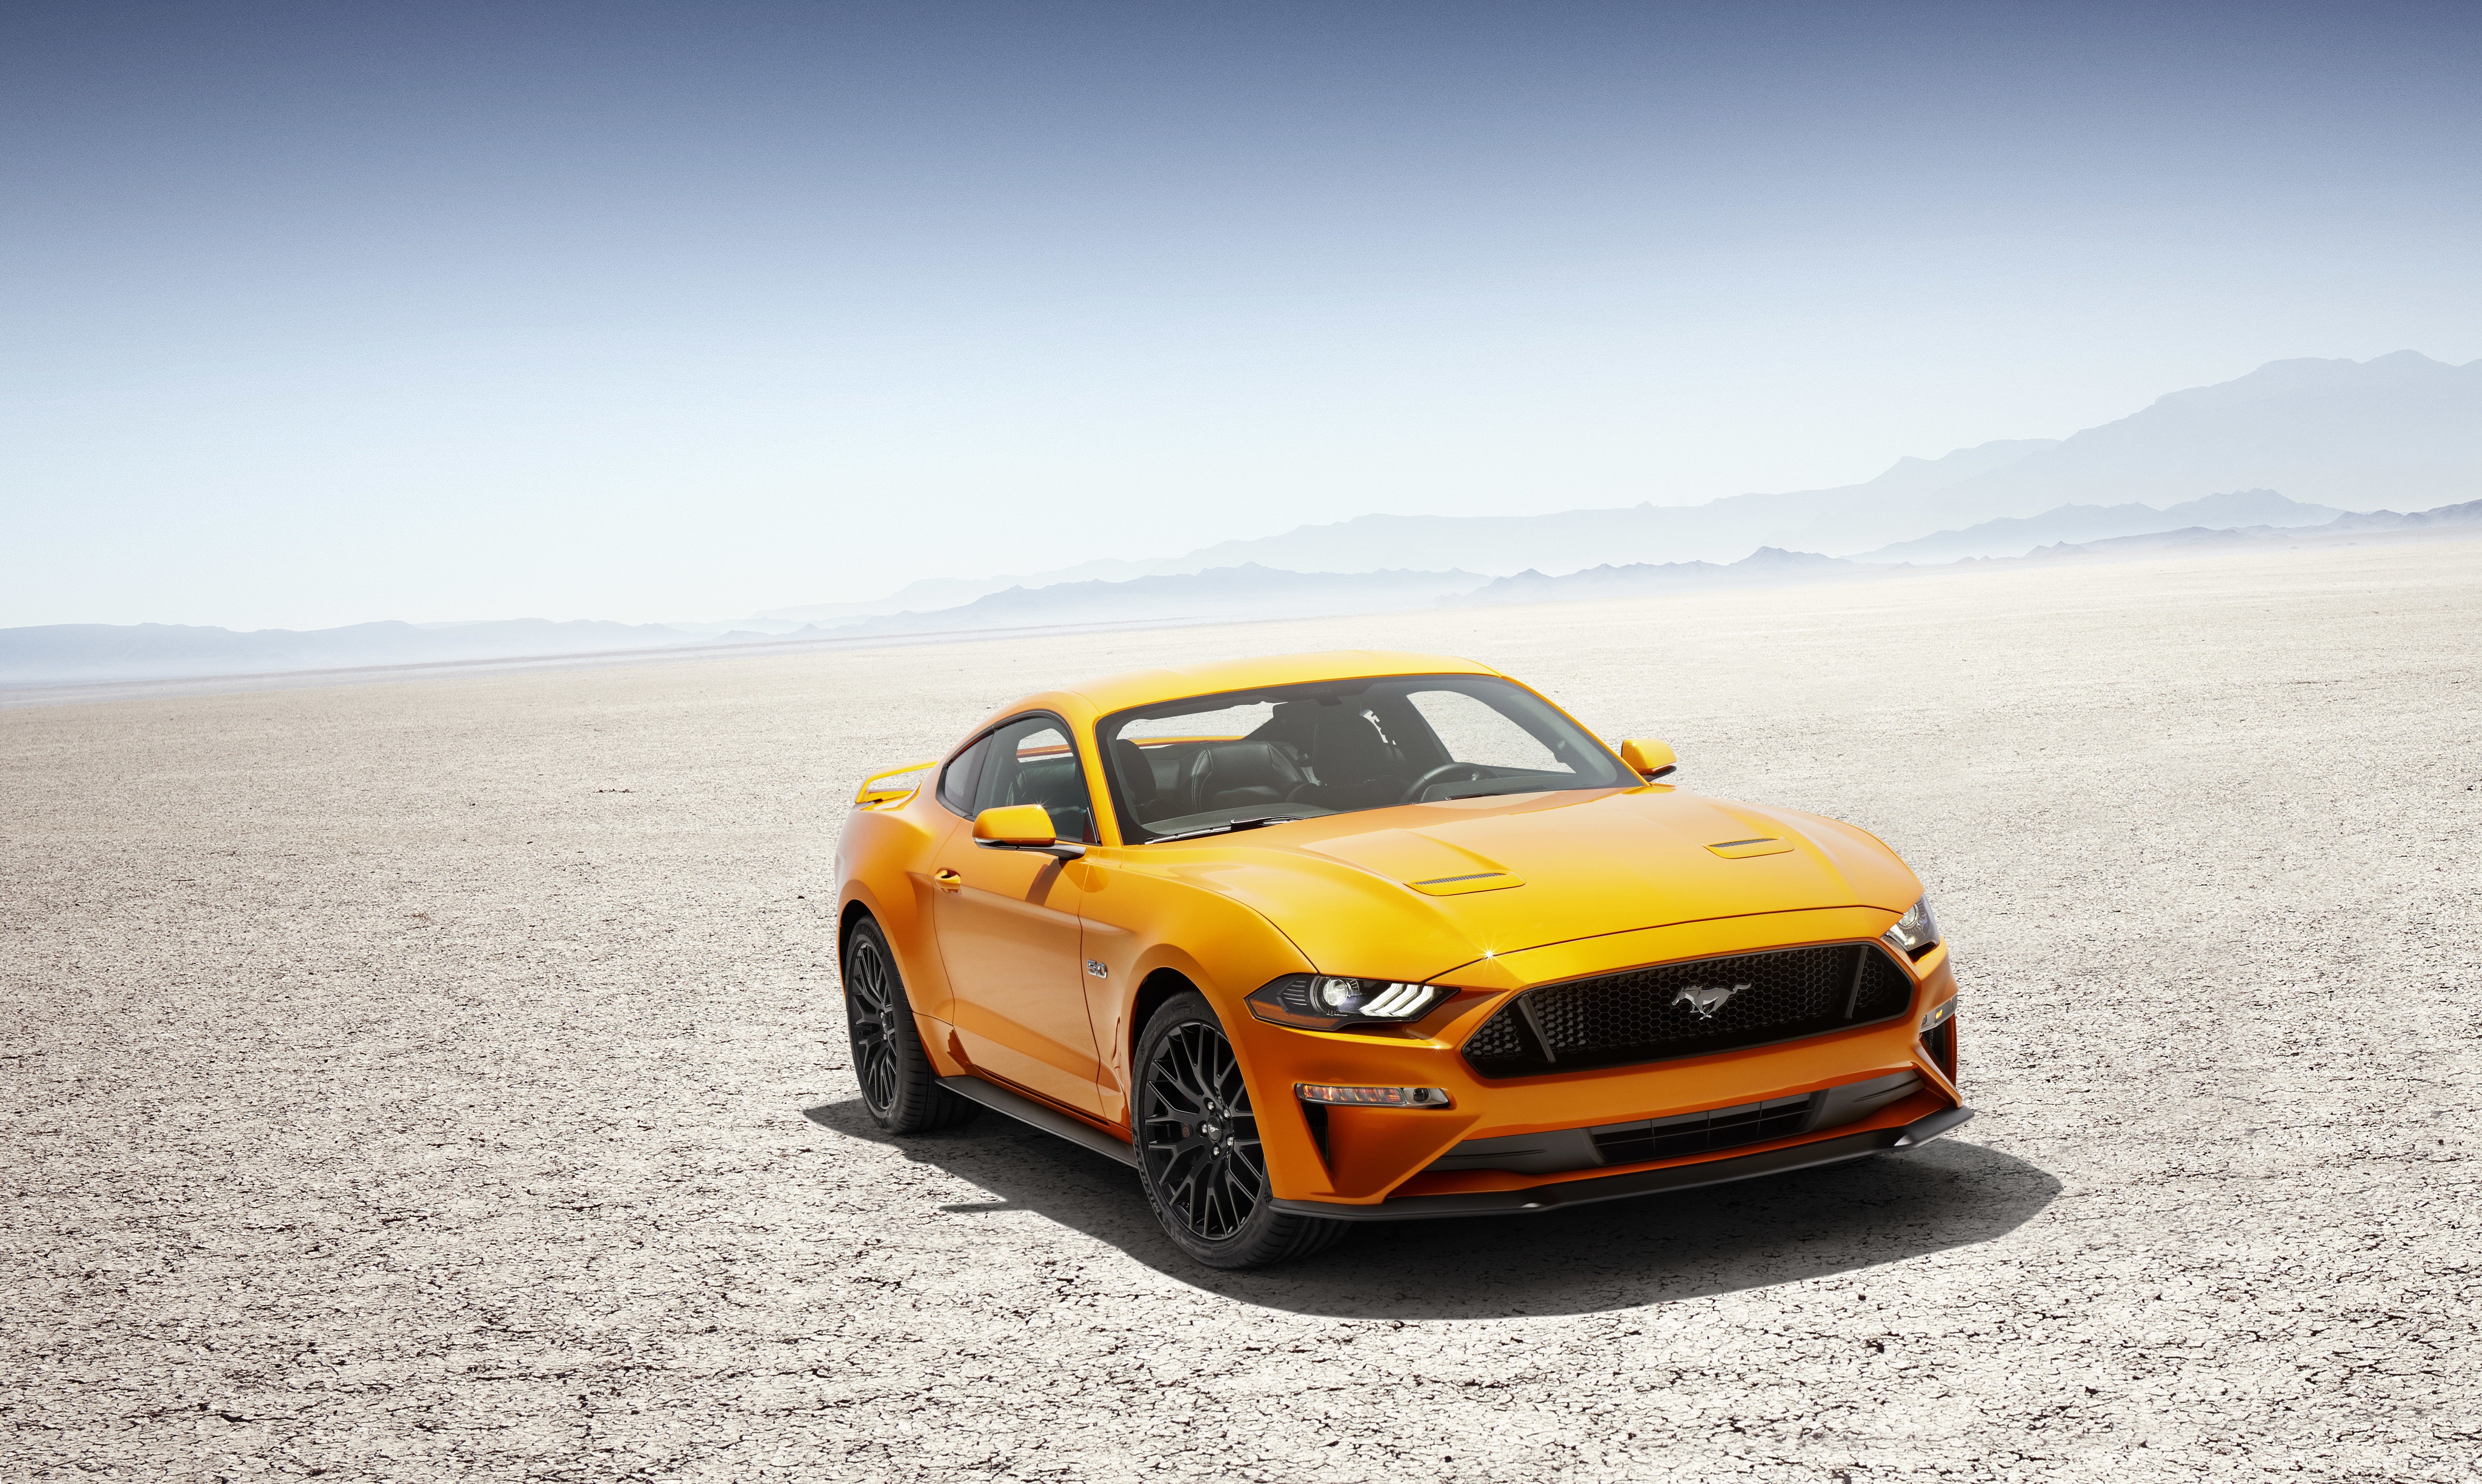 Car Desert Ford Ford Mustang Muscle Car Vehicle Yellow Car 4096x2449